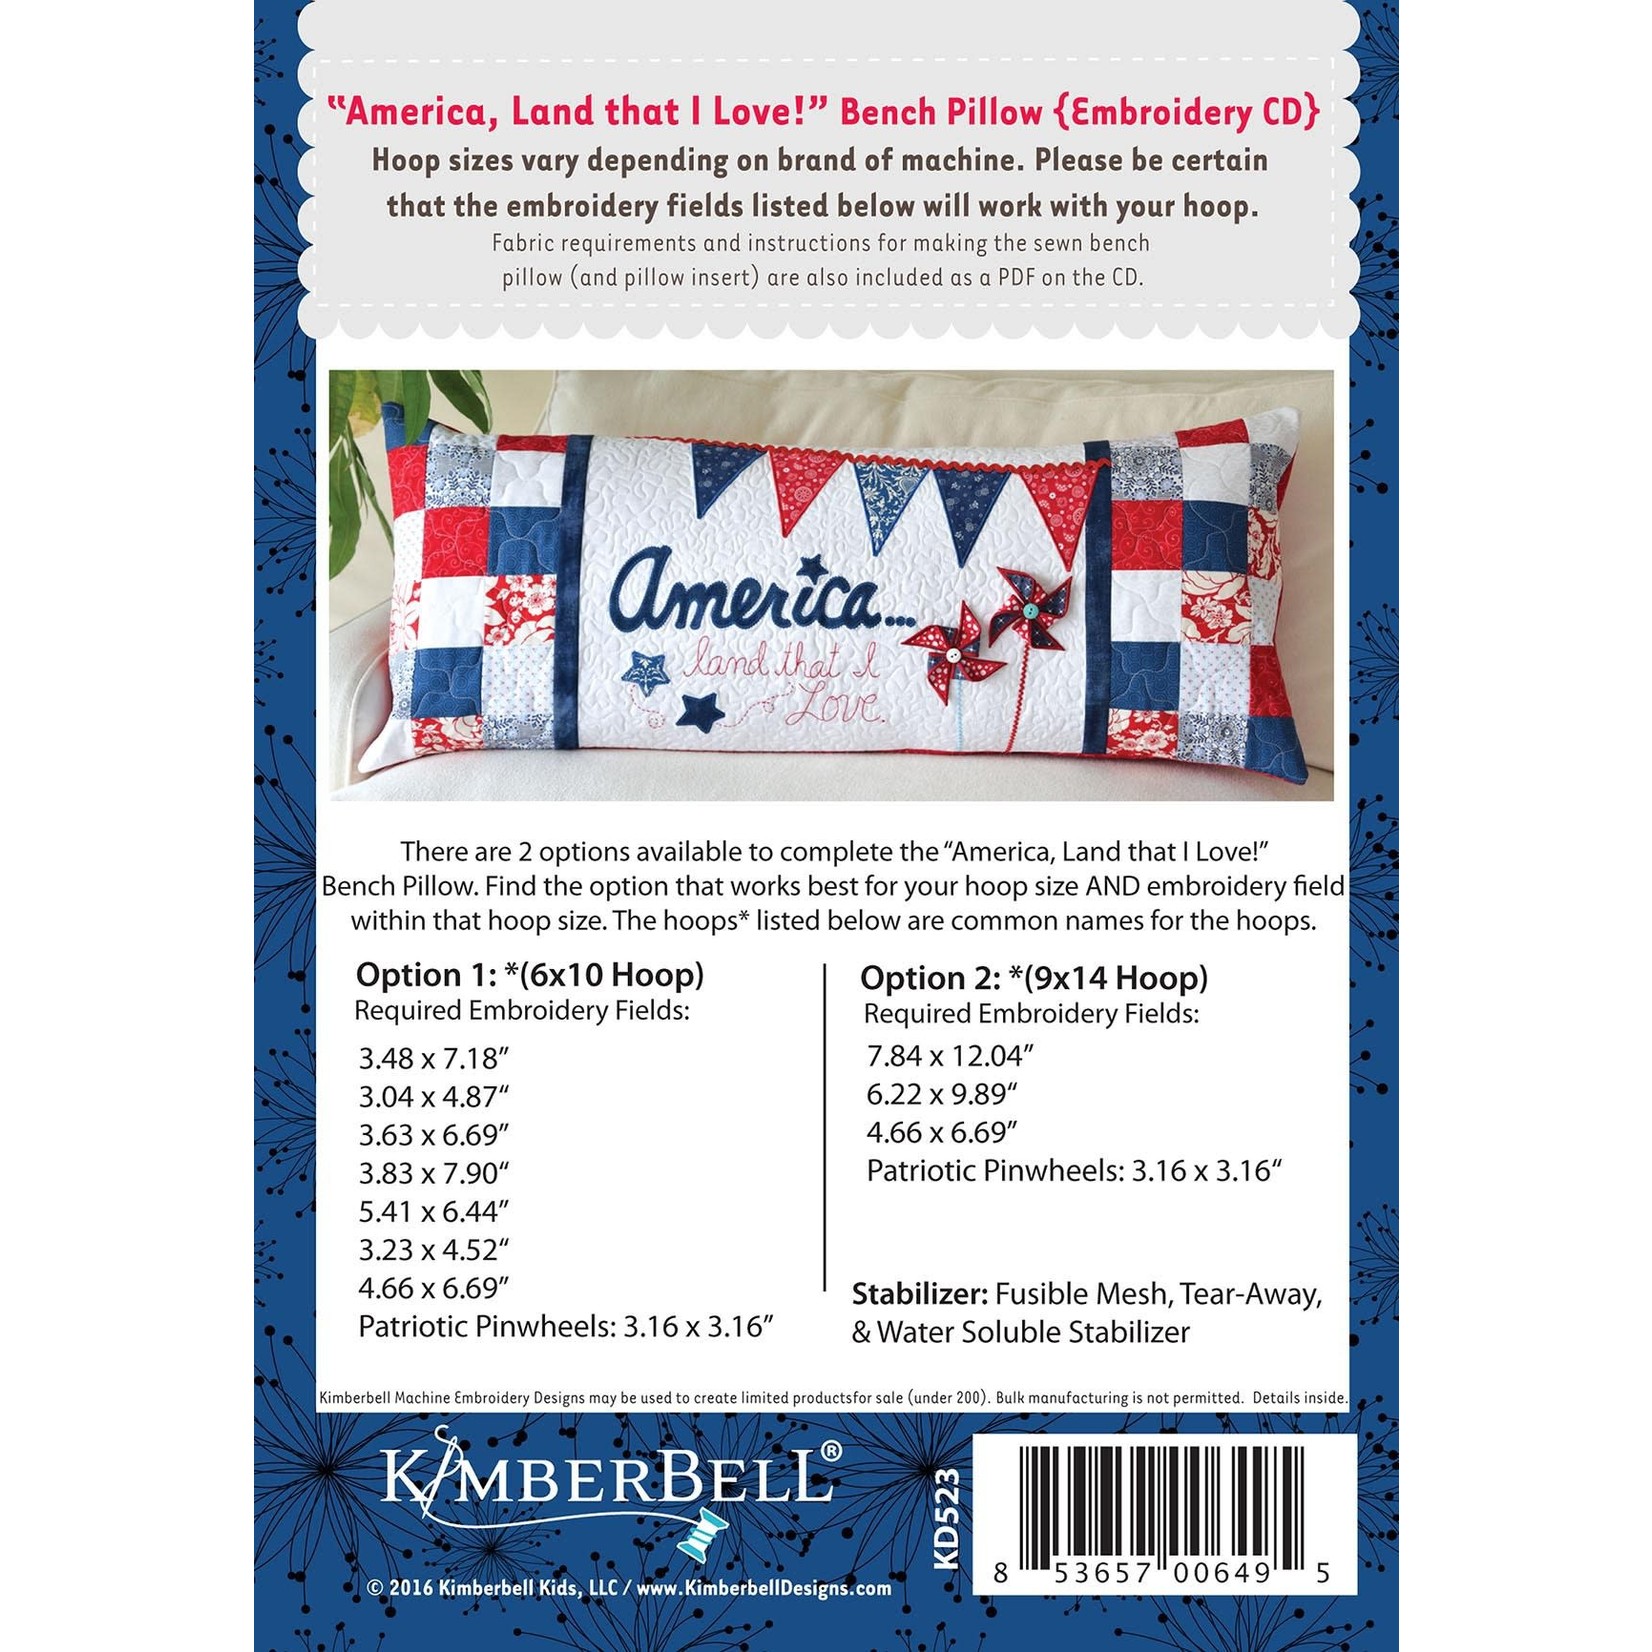 Kimberbell Designs America, Land that I Love! Bench Pillow Machine Embroidery CD